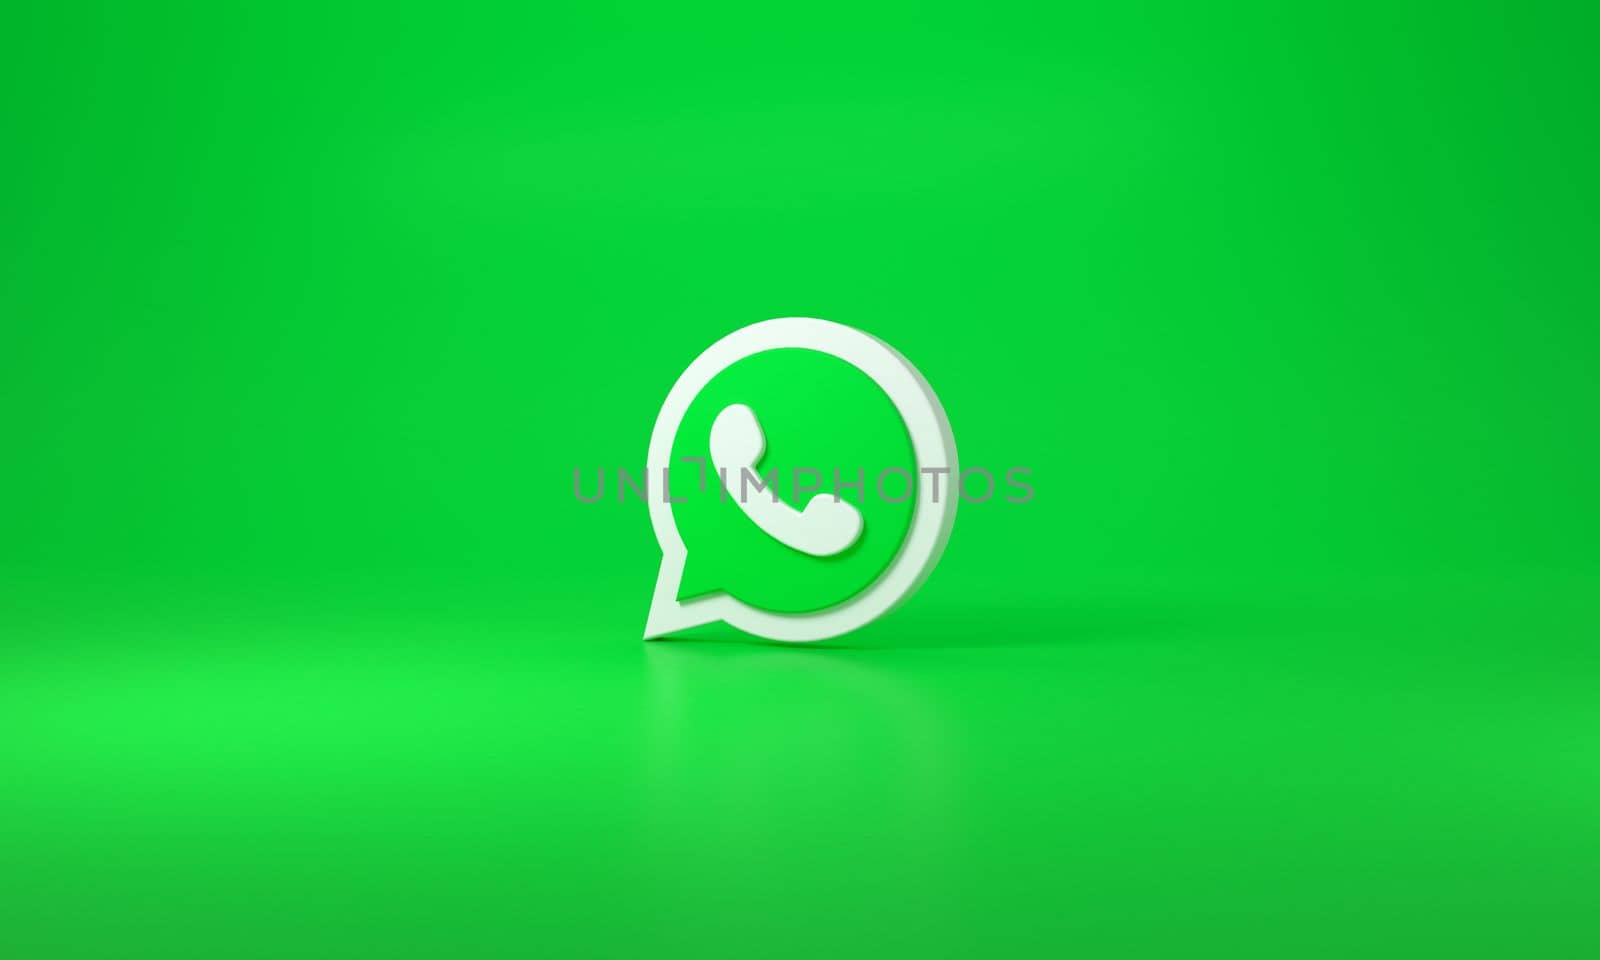 Whatsapp logo on green background. by ImagesRouges